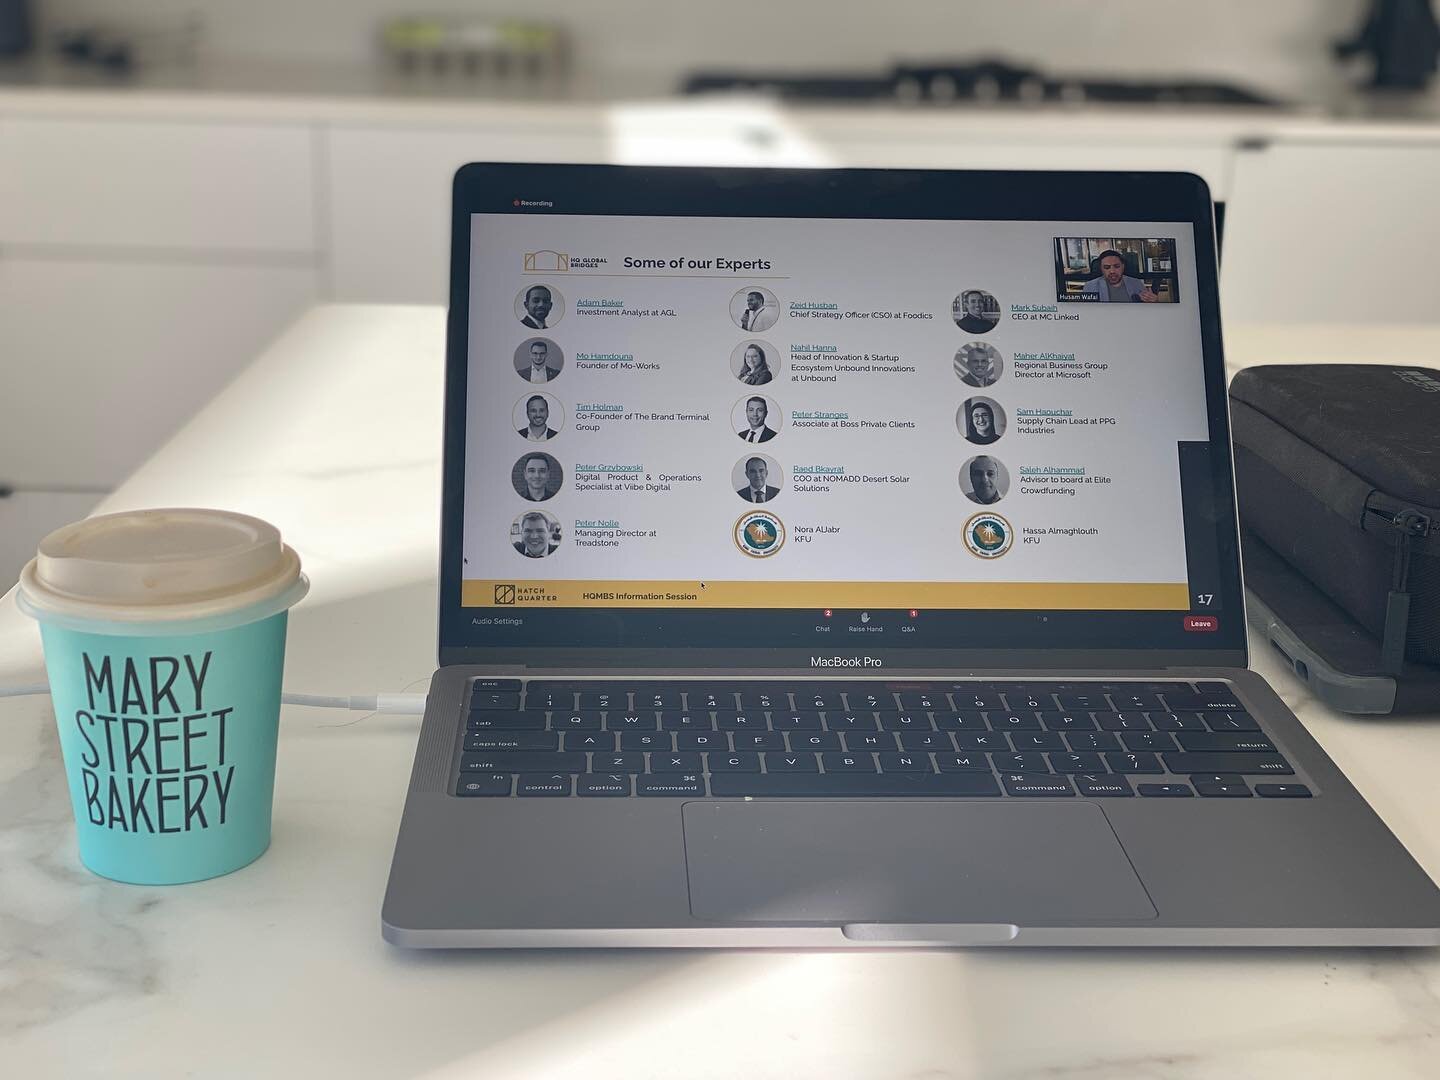 &hellip; Nothin&rsquo; like a morning Zoom session!

#kahnsulting #tax #businessadvisory #CA #CharteredAccountant #Perthaccountant #tax #finance #bookkeeping #smallbusiness #Xero #startup #Perthisok #bookkeeping #perthbookkeeper #accountant #taxaccou